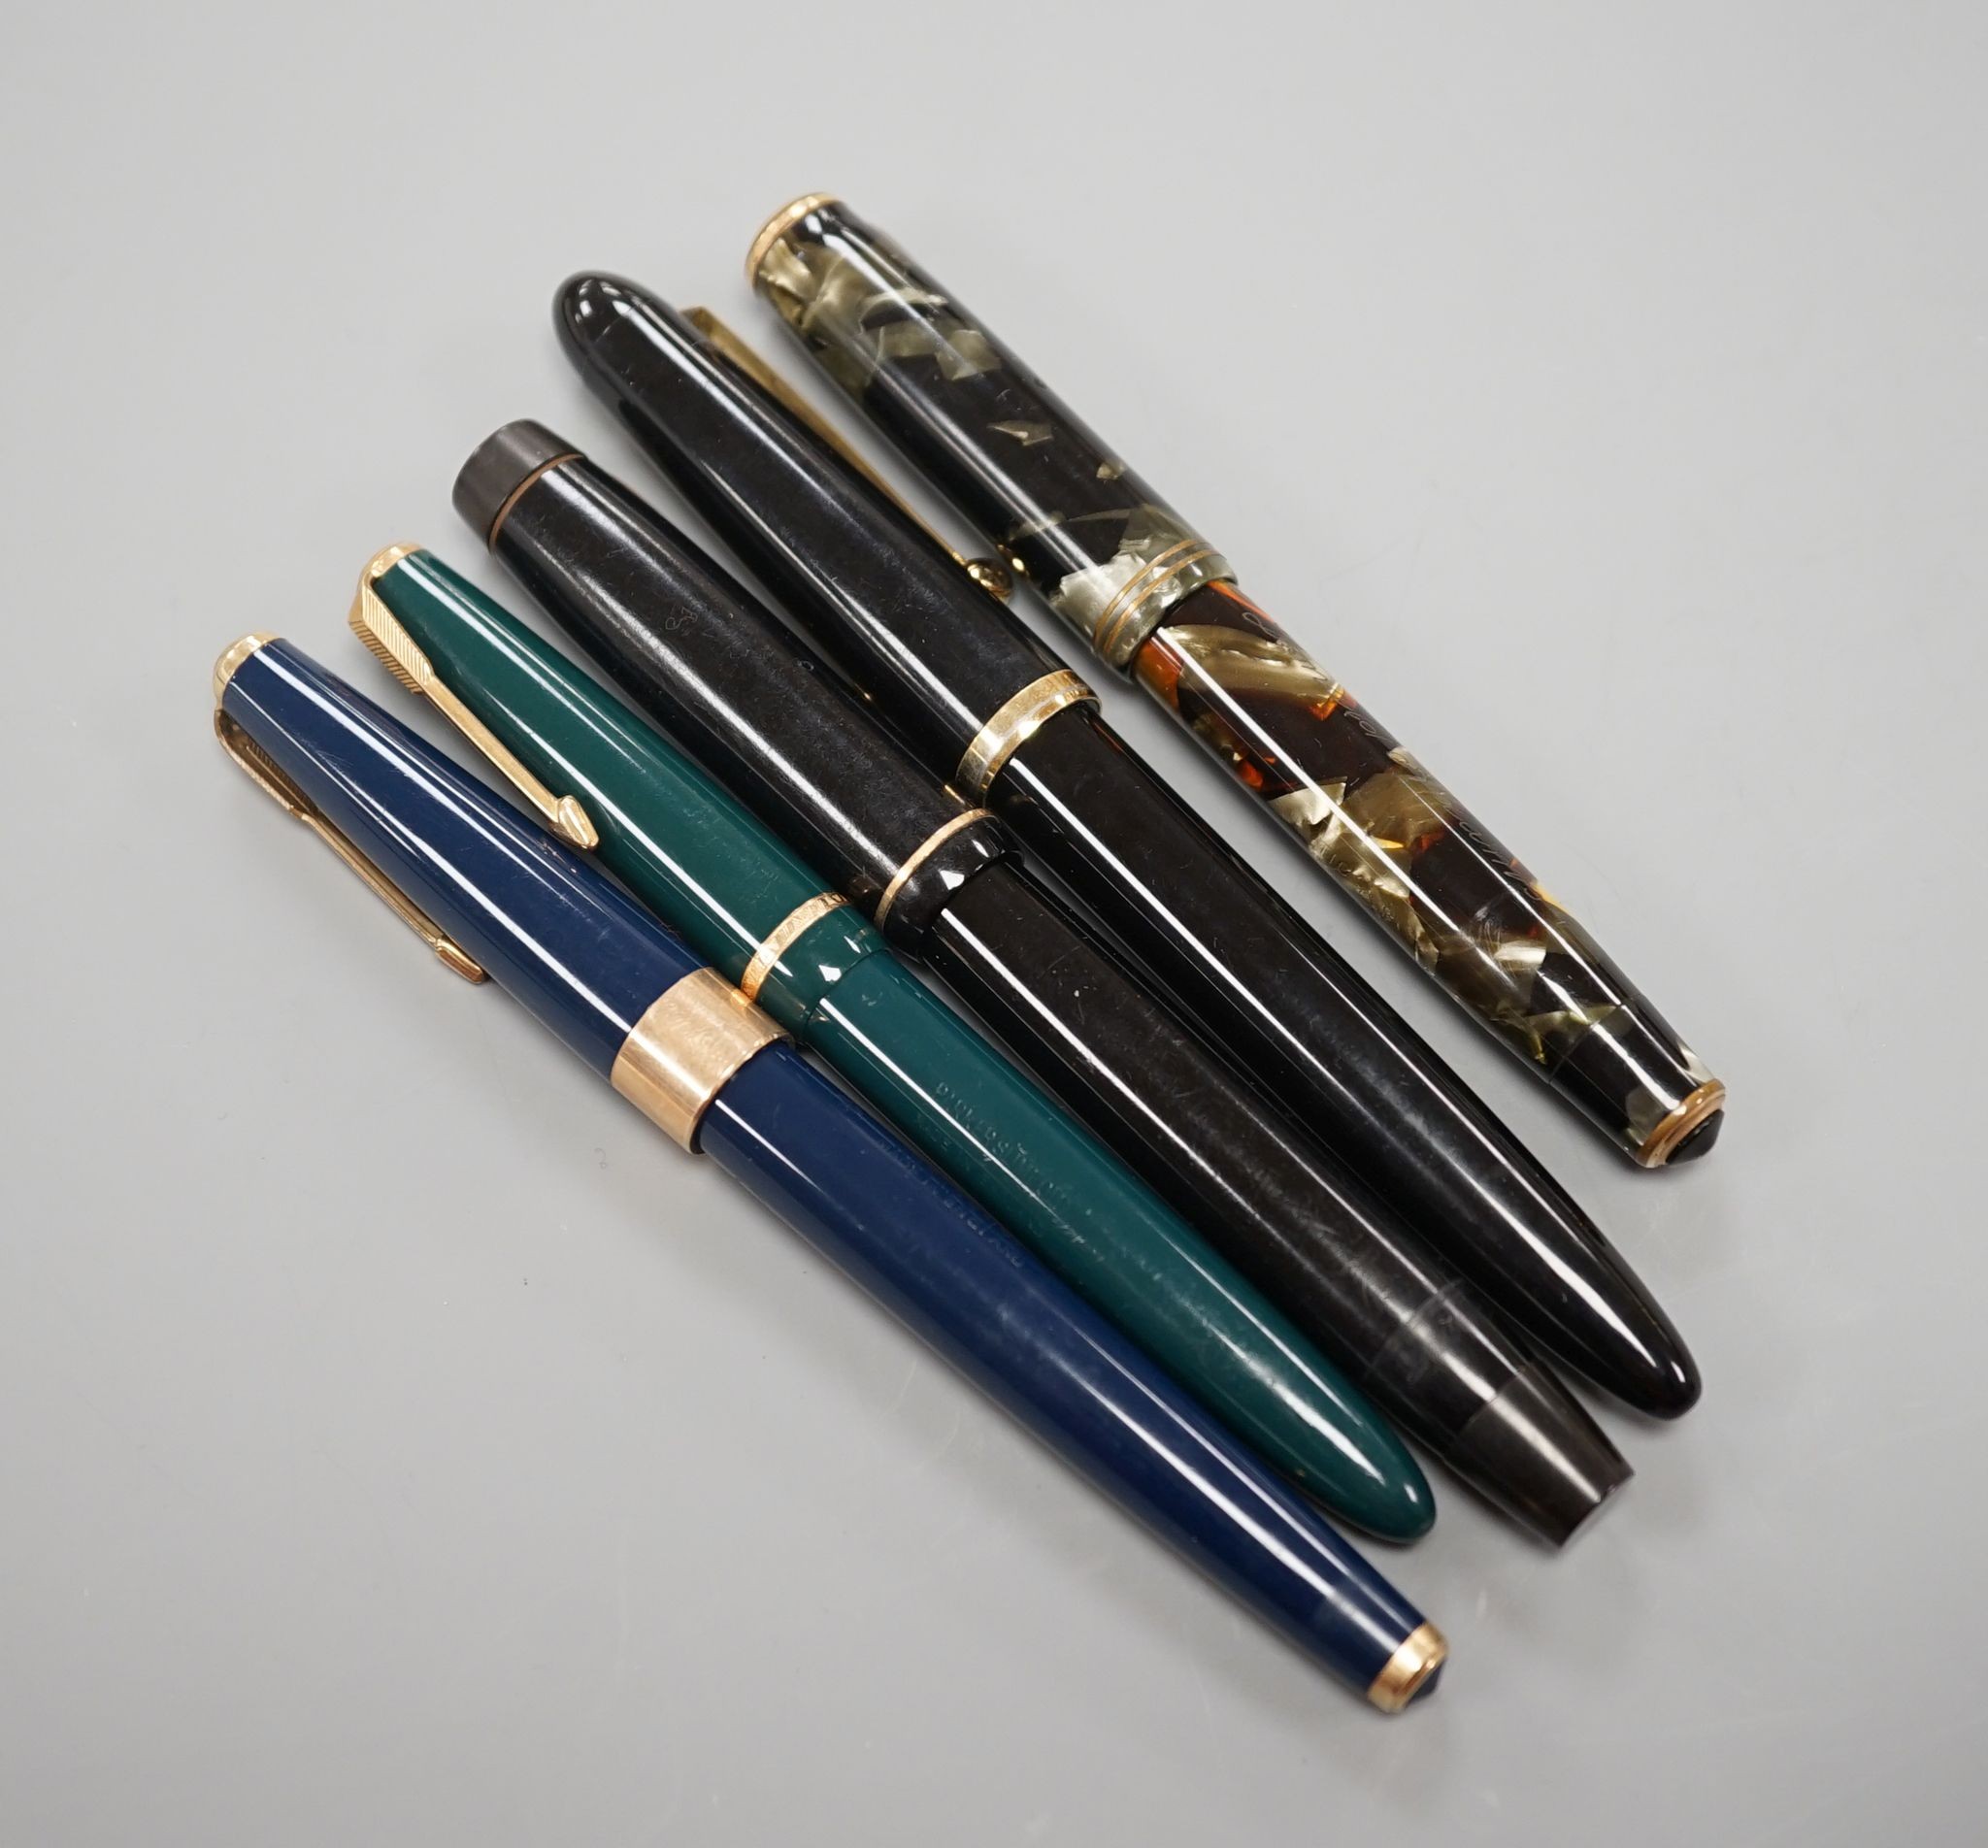 4 fountain pens and a ball point pen